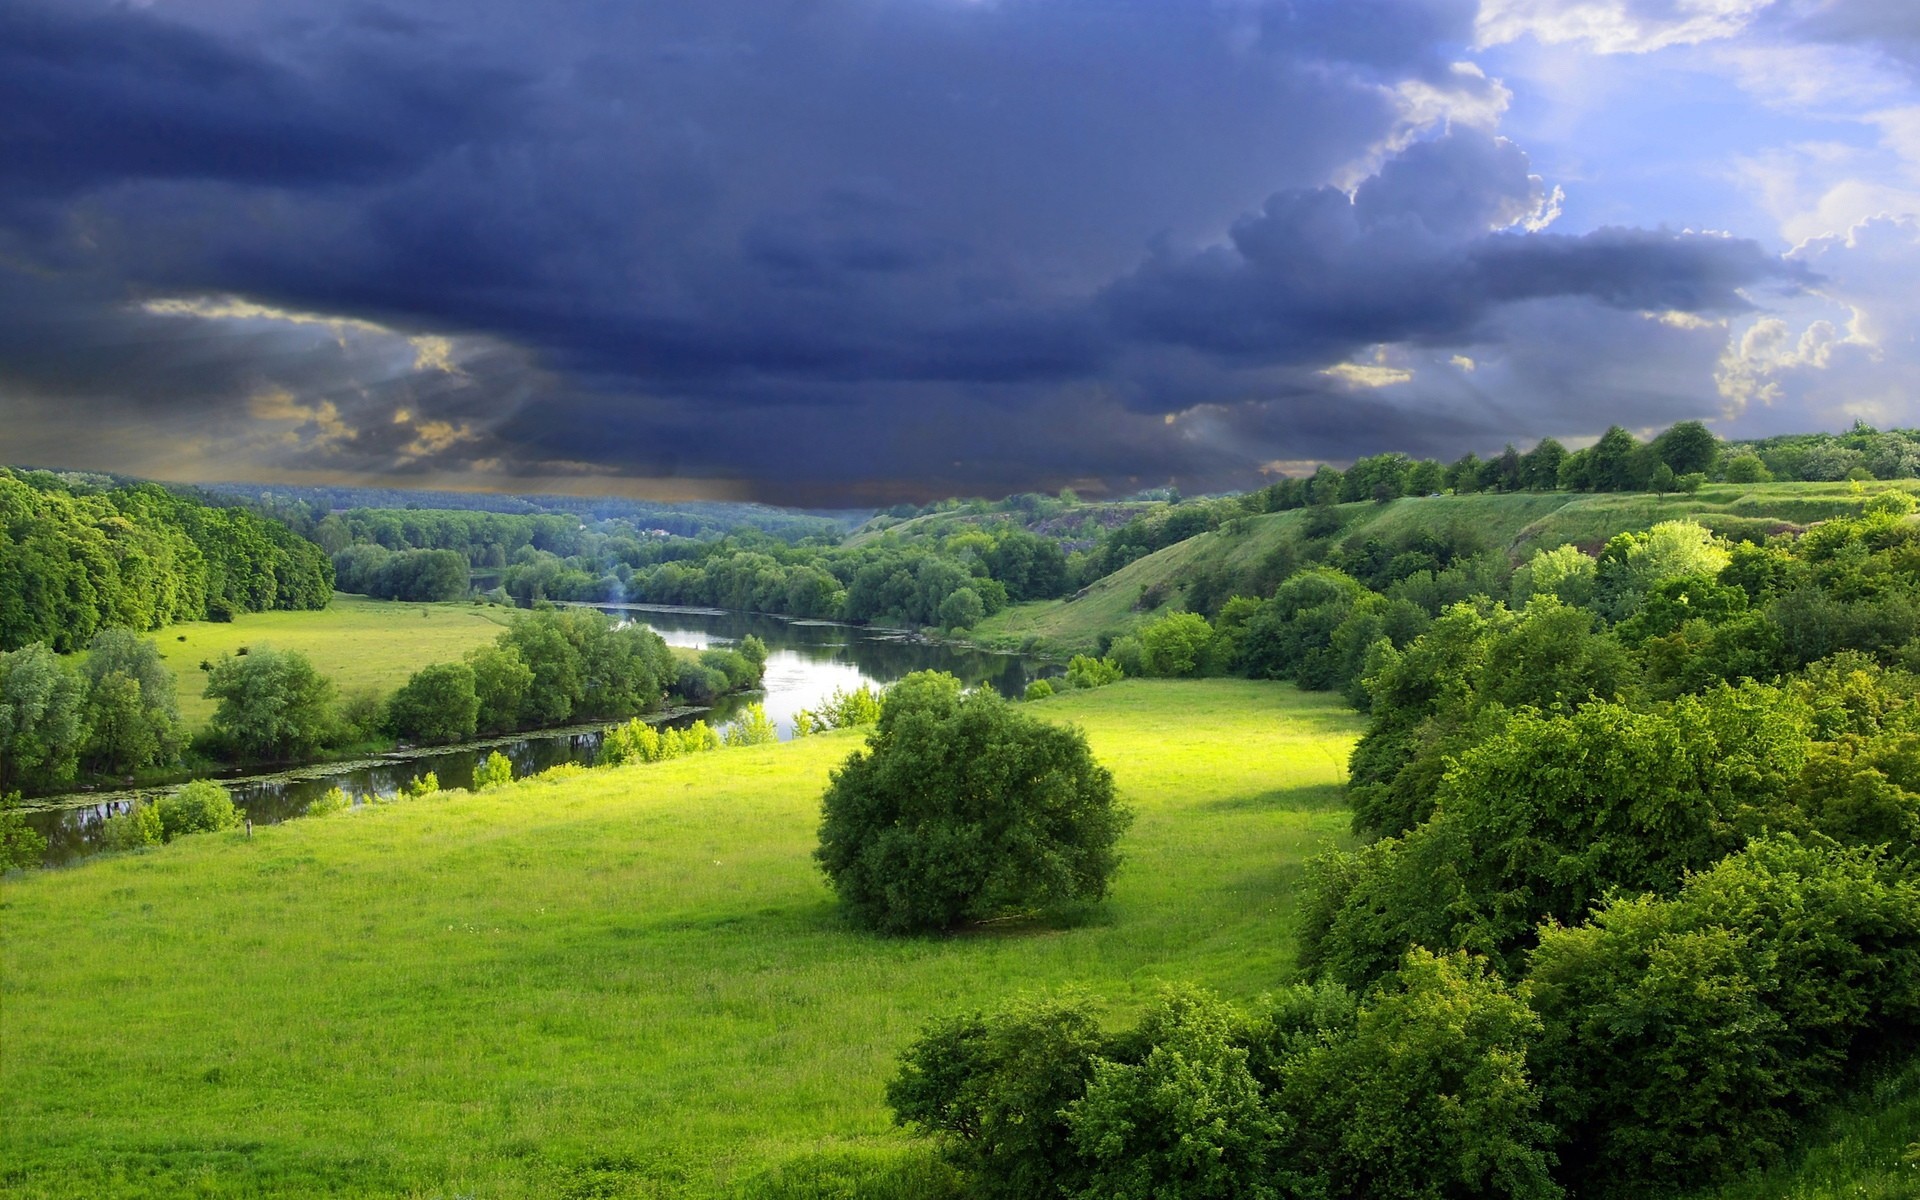  Amazing Green Nature Landscape Image Download HD Wallpapers